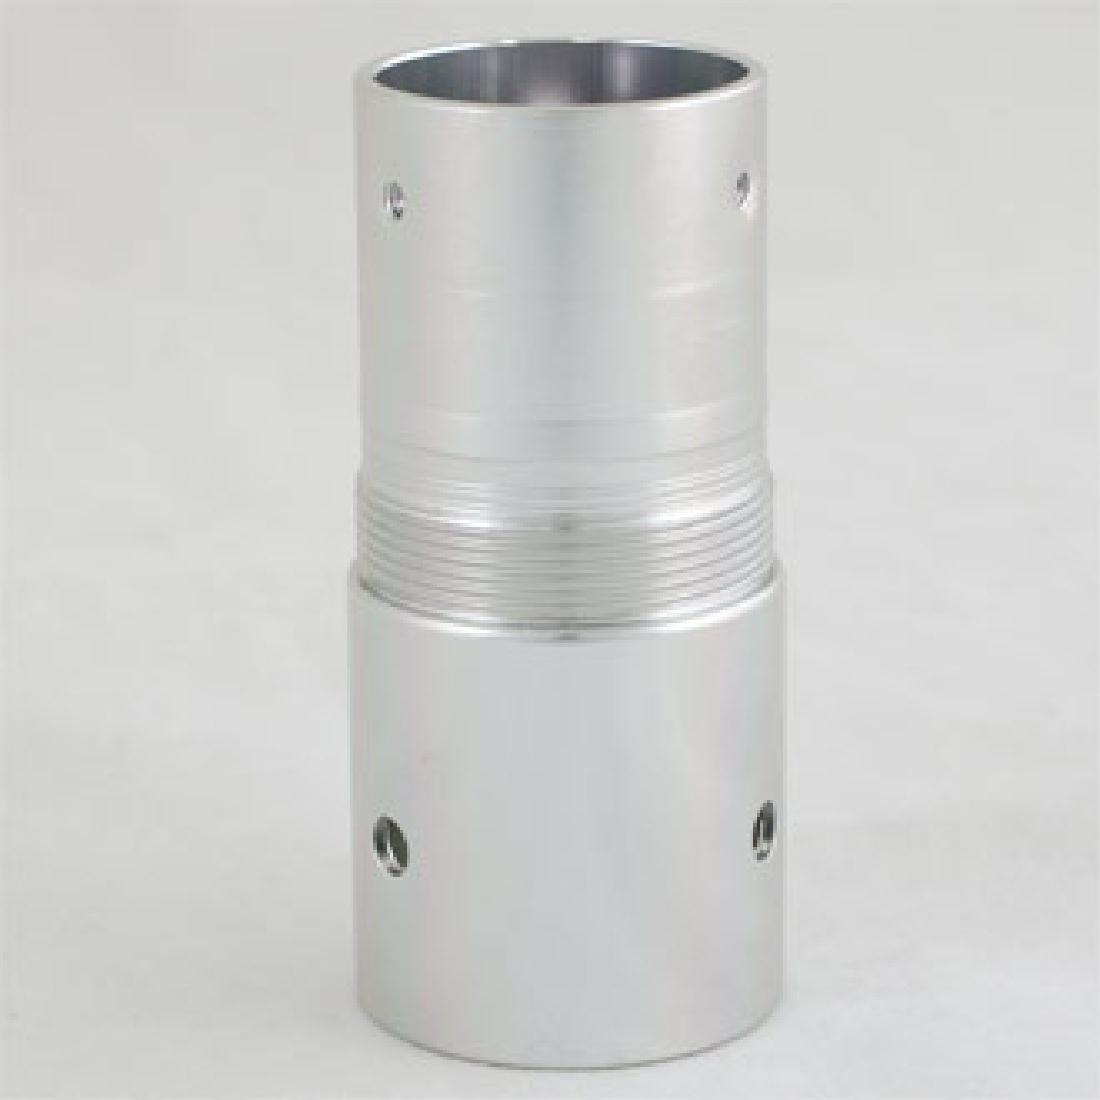 Reflective Cover Connector - AC507 - 1